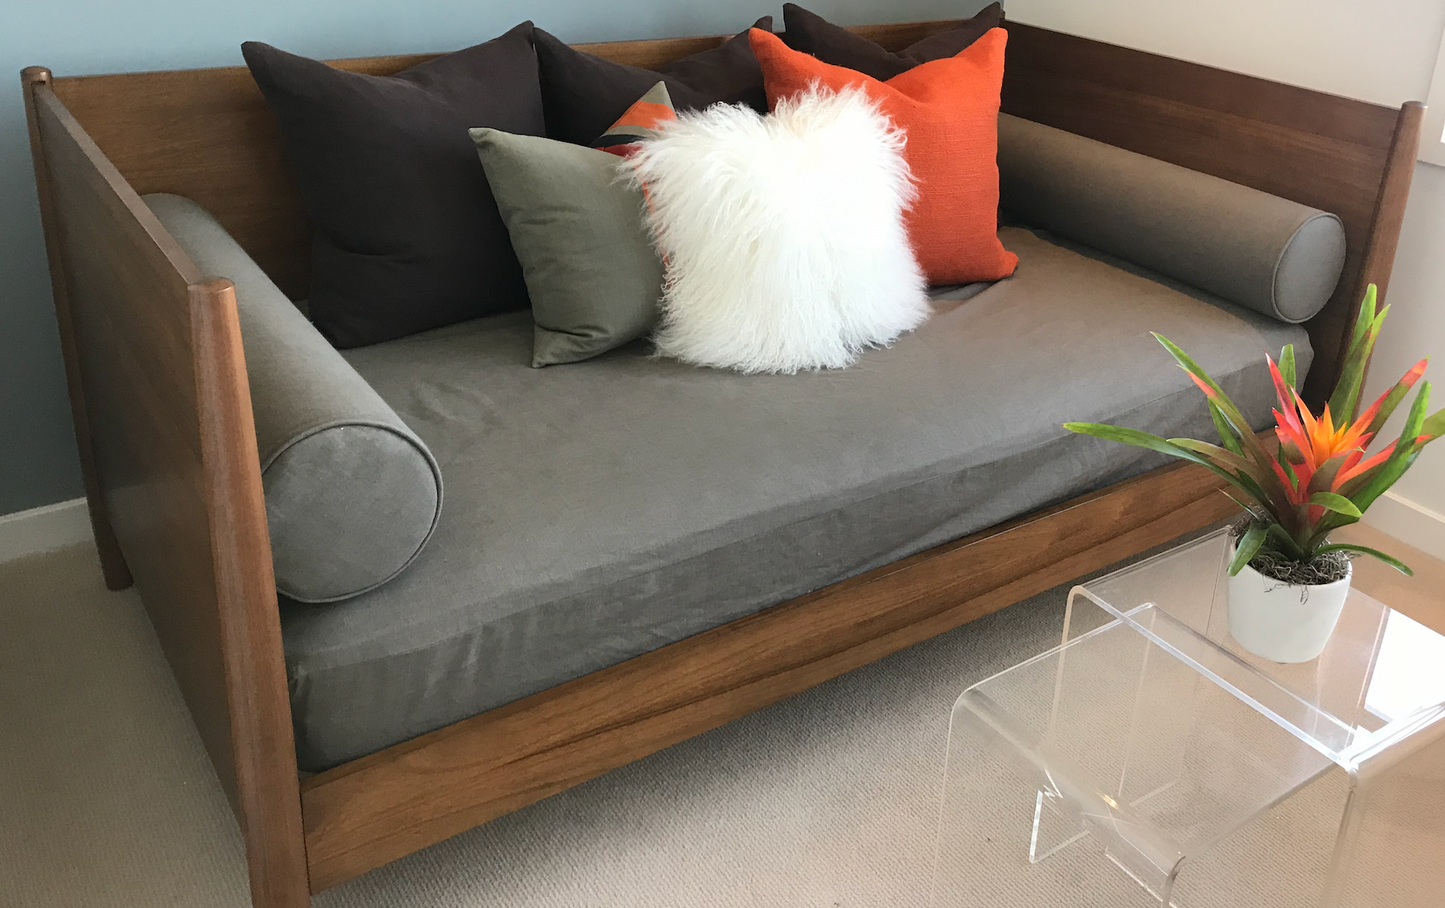 Acorn colored mid century inspired day bed